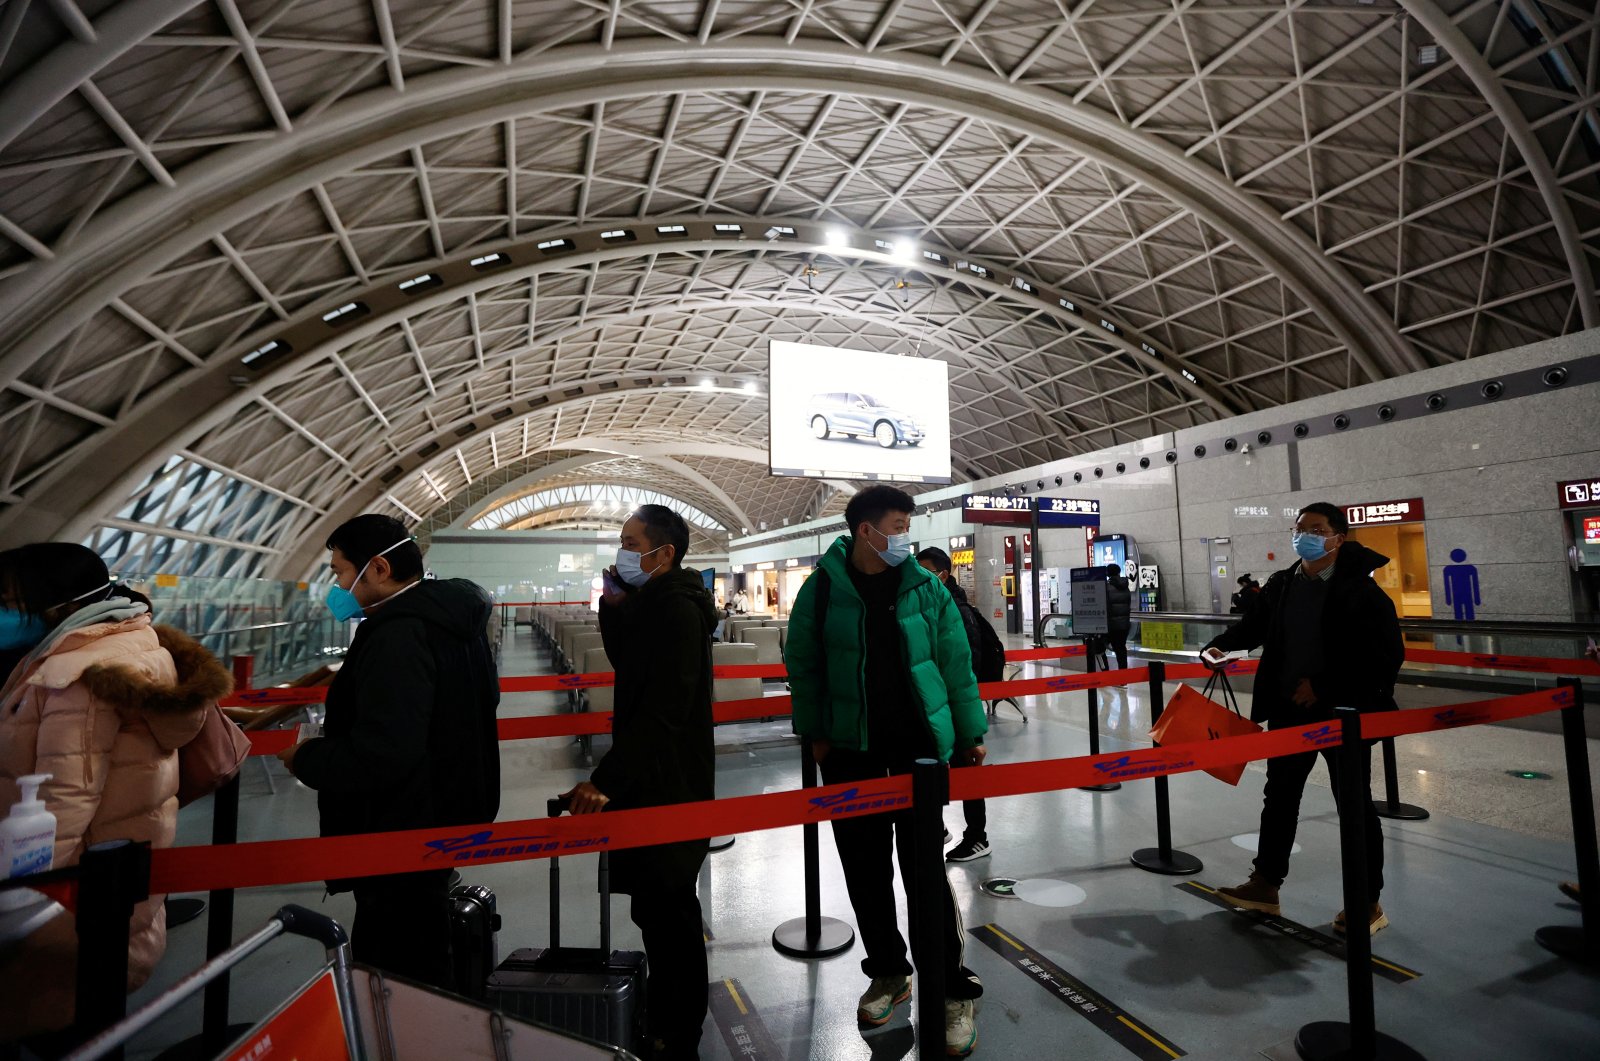 Travelers queue to board a plane at Chengdu Shuangliu International Airport amid a wave of COVID-19 infections, in Chengdu, Sichuan province, China Dec. 30, 2022. (Reuters Photo)